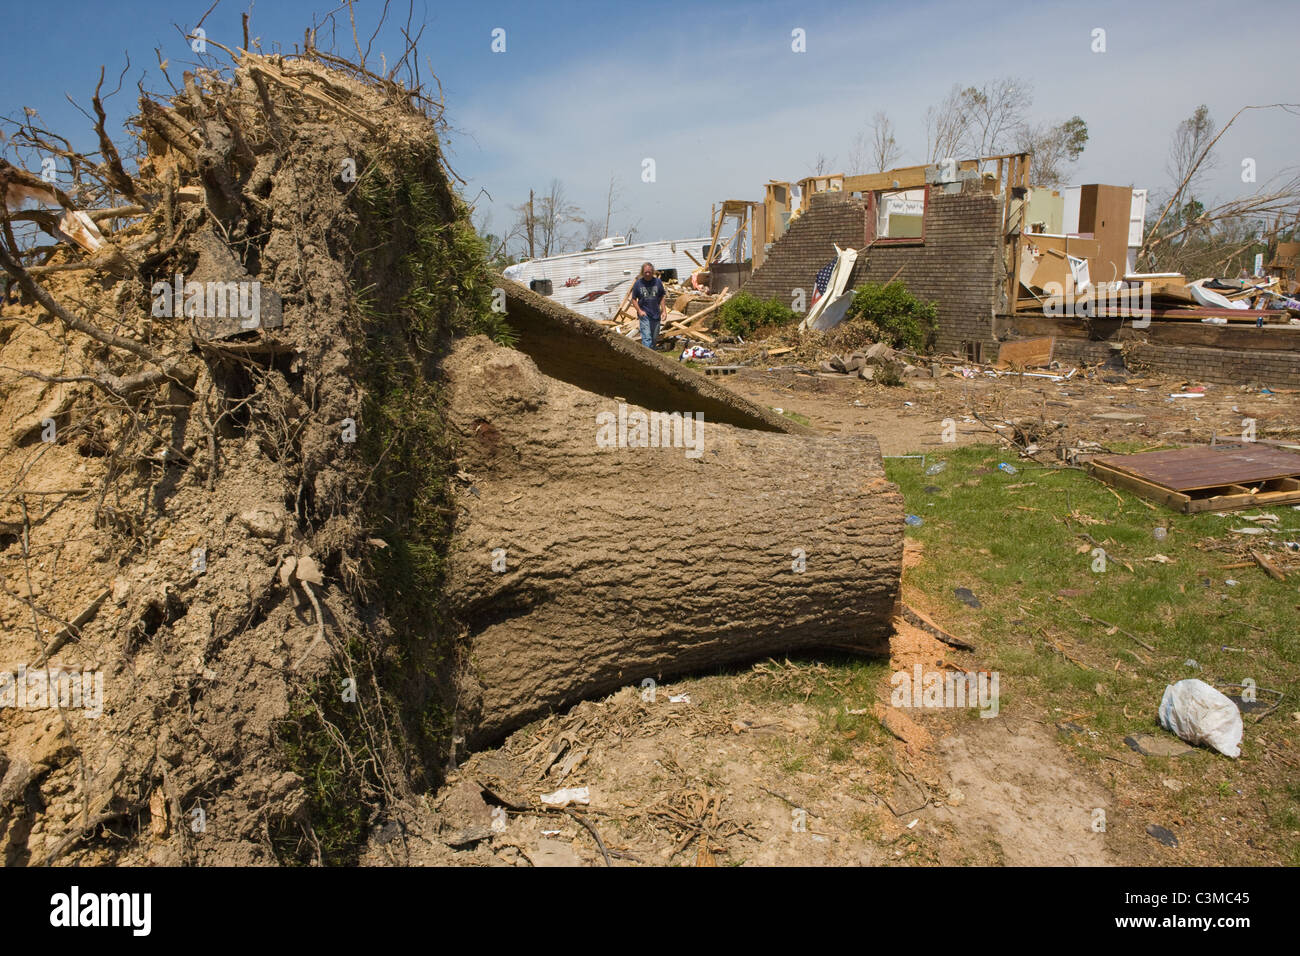 Large tree uprooted in Tuscaloosa Alabama after Tornado, May 2011 Stock Photo